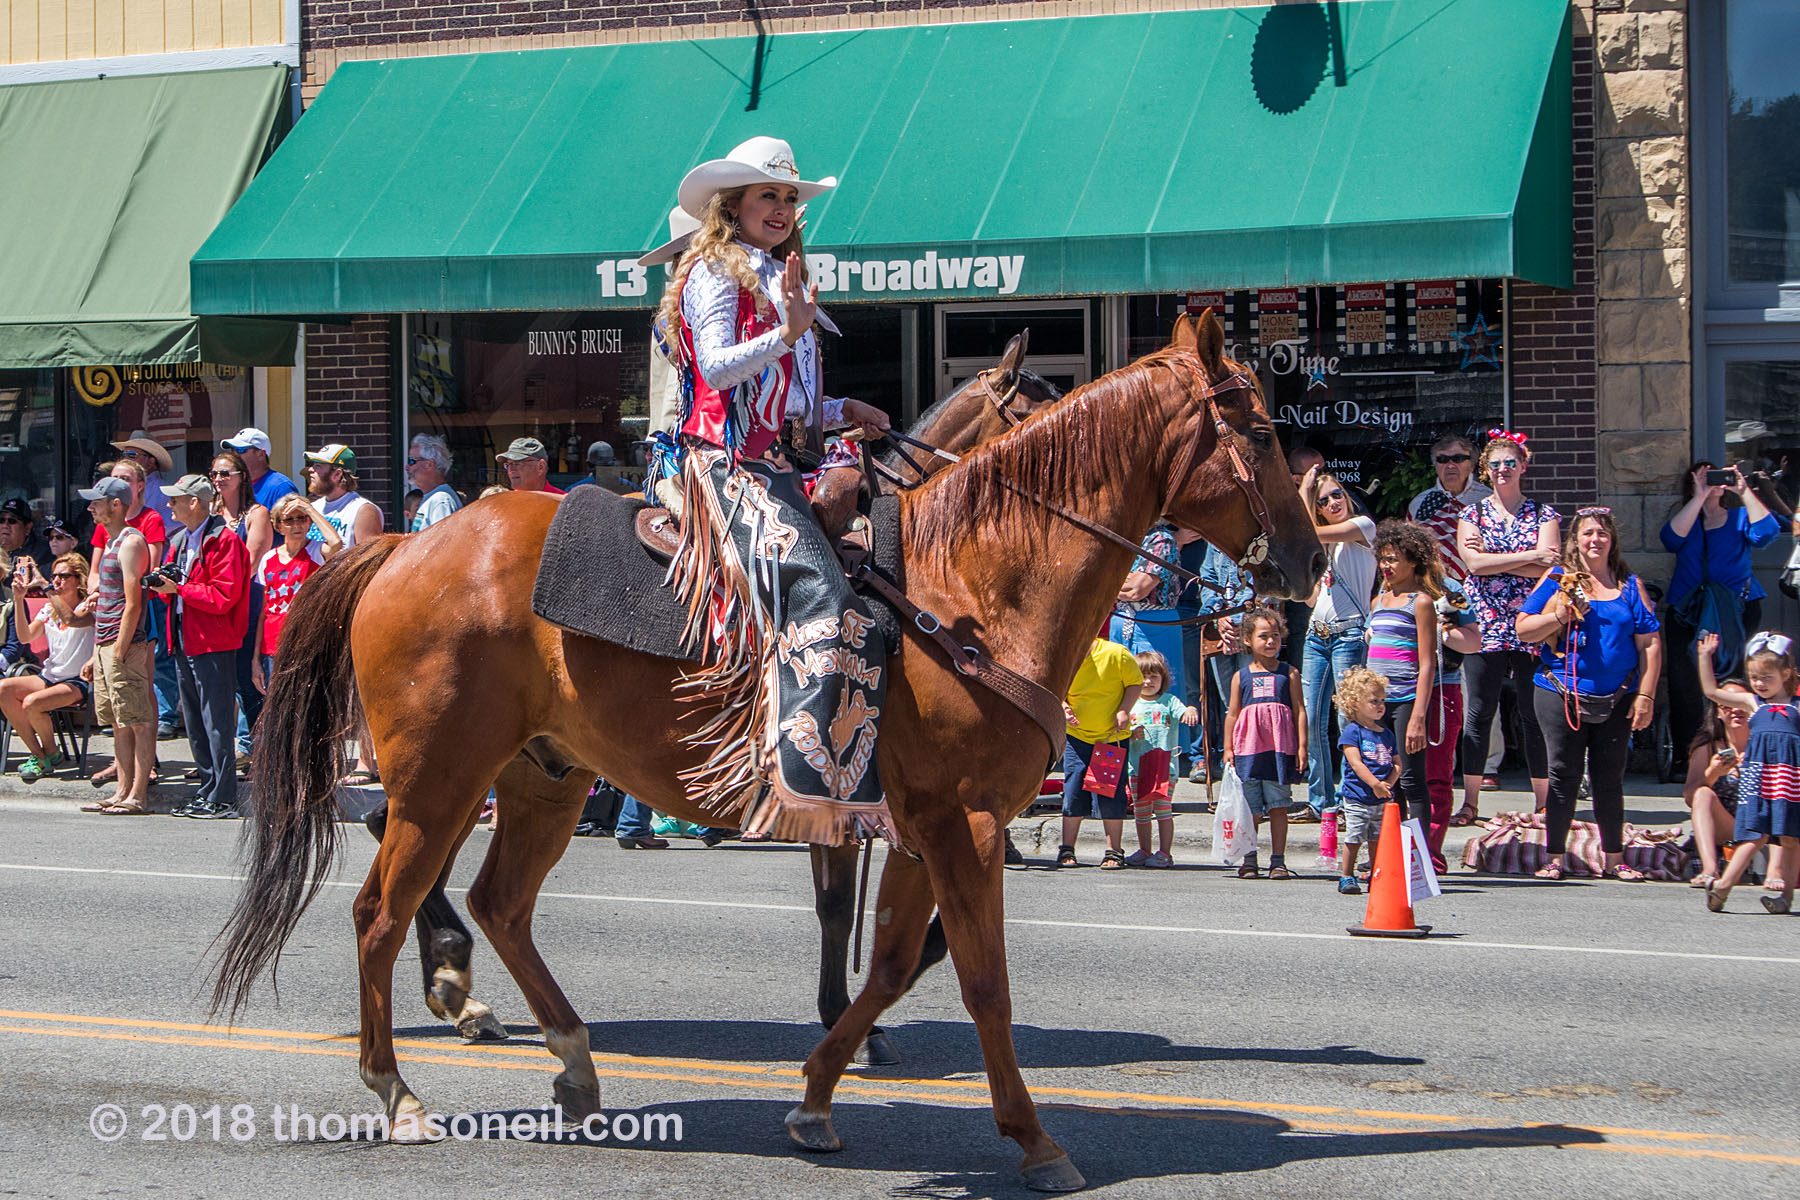 4th of July parade, Red Lodge, MT.  Click for next photo.